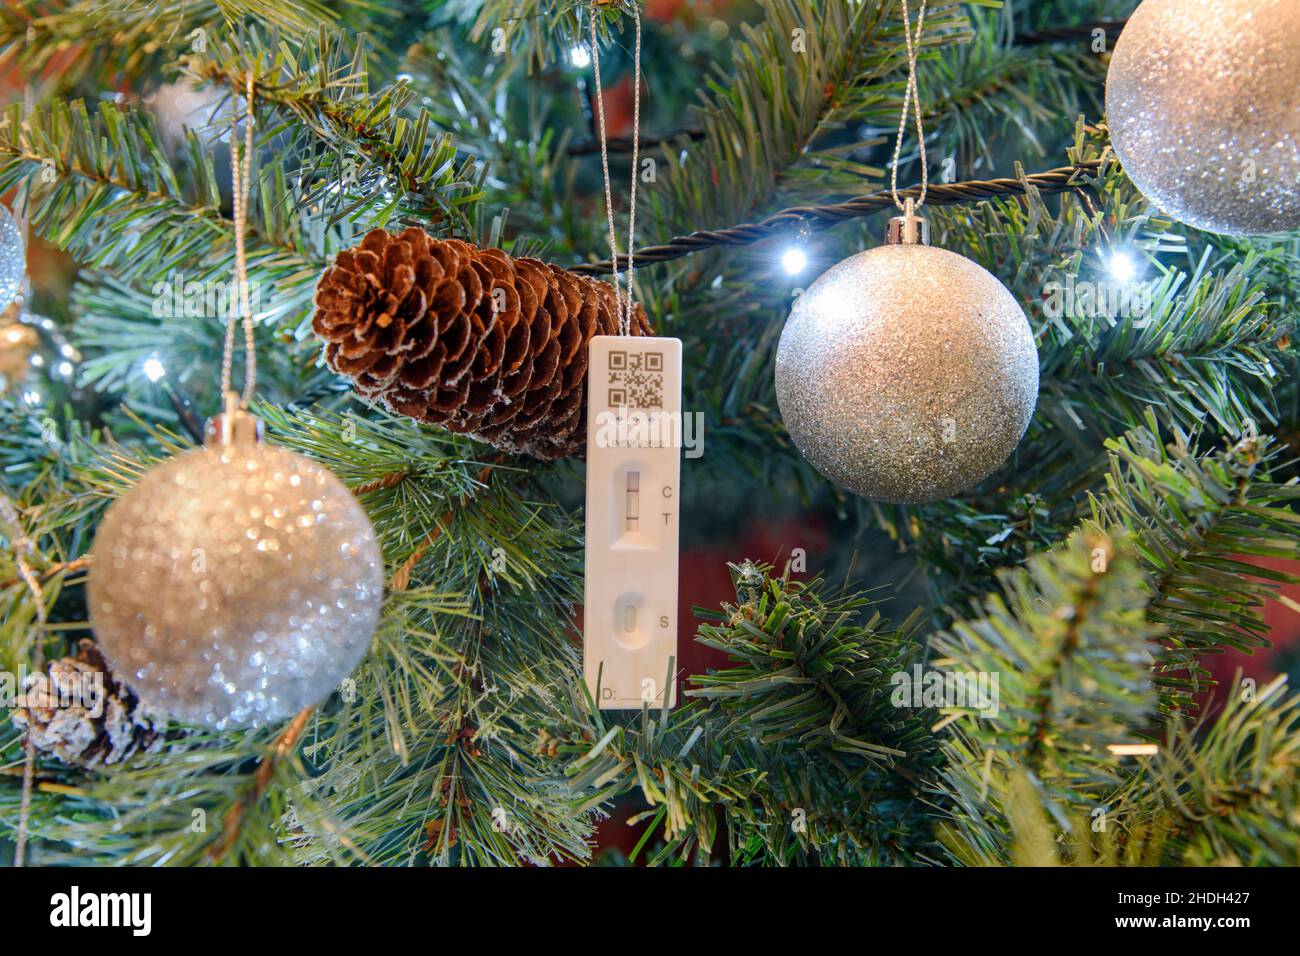 Coronavirus pandemic - A Positive Covid-19 Lateral Flow Test Result hanging on a Christmas tree Stock Photo